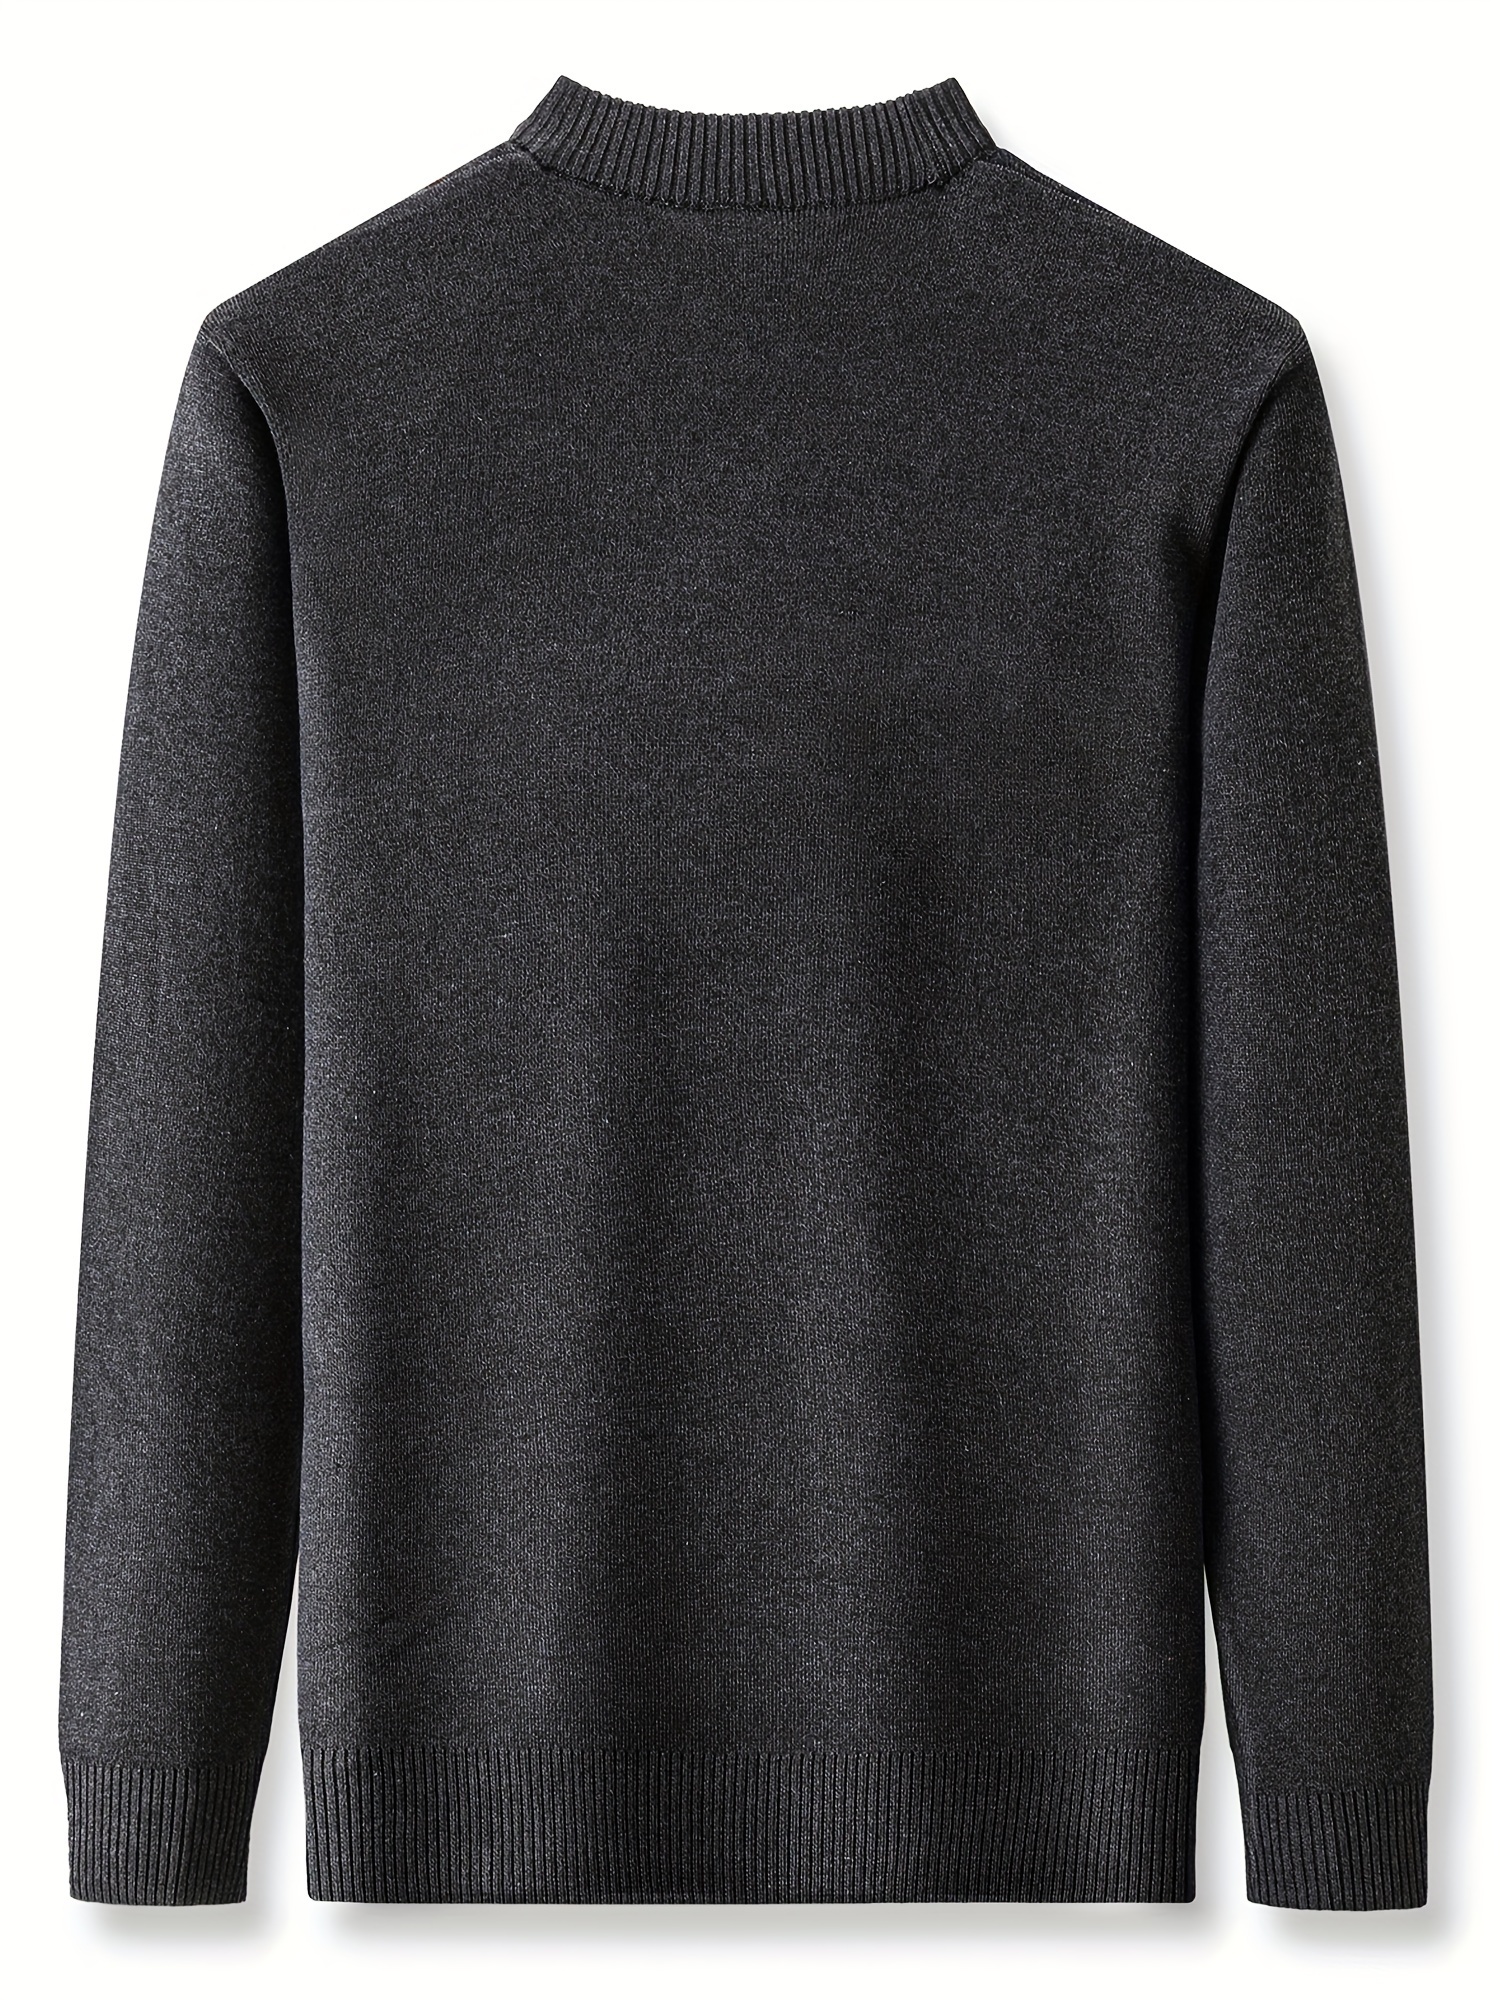 Men's Stylish Loose Knitted Sweater, Casual Slightly Stretch